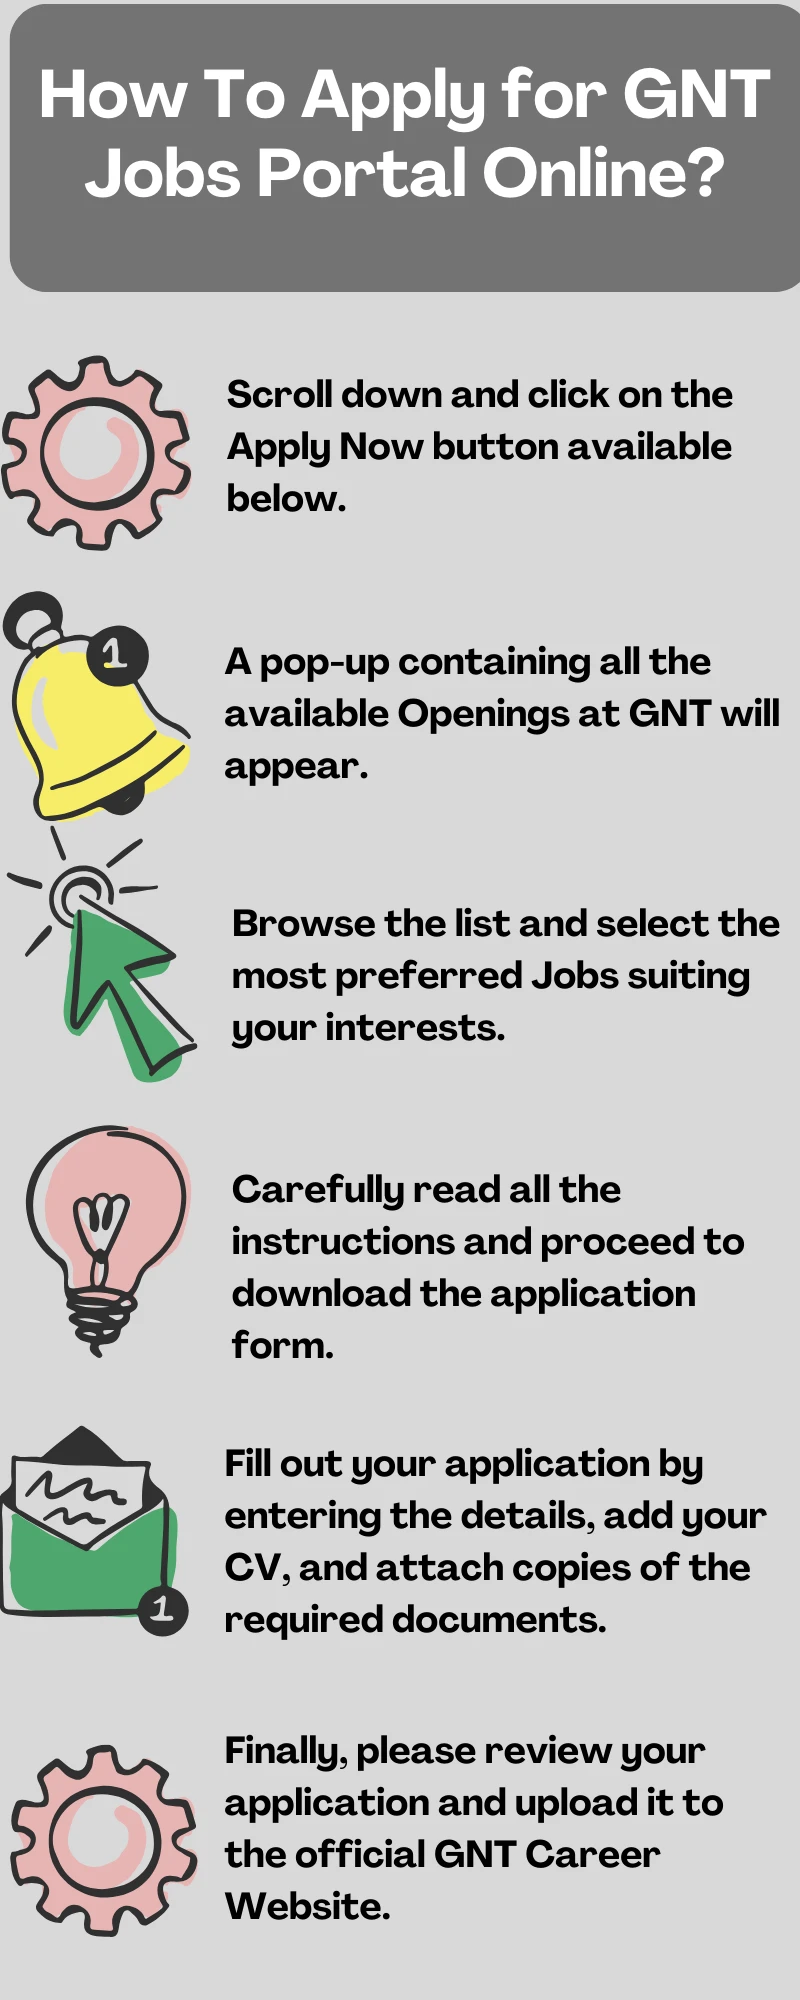 How To Apply for GNT Jobs Portal Online?